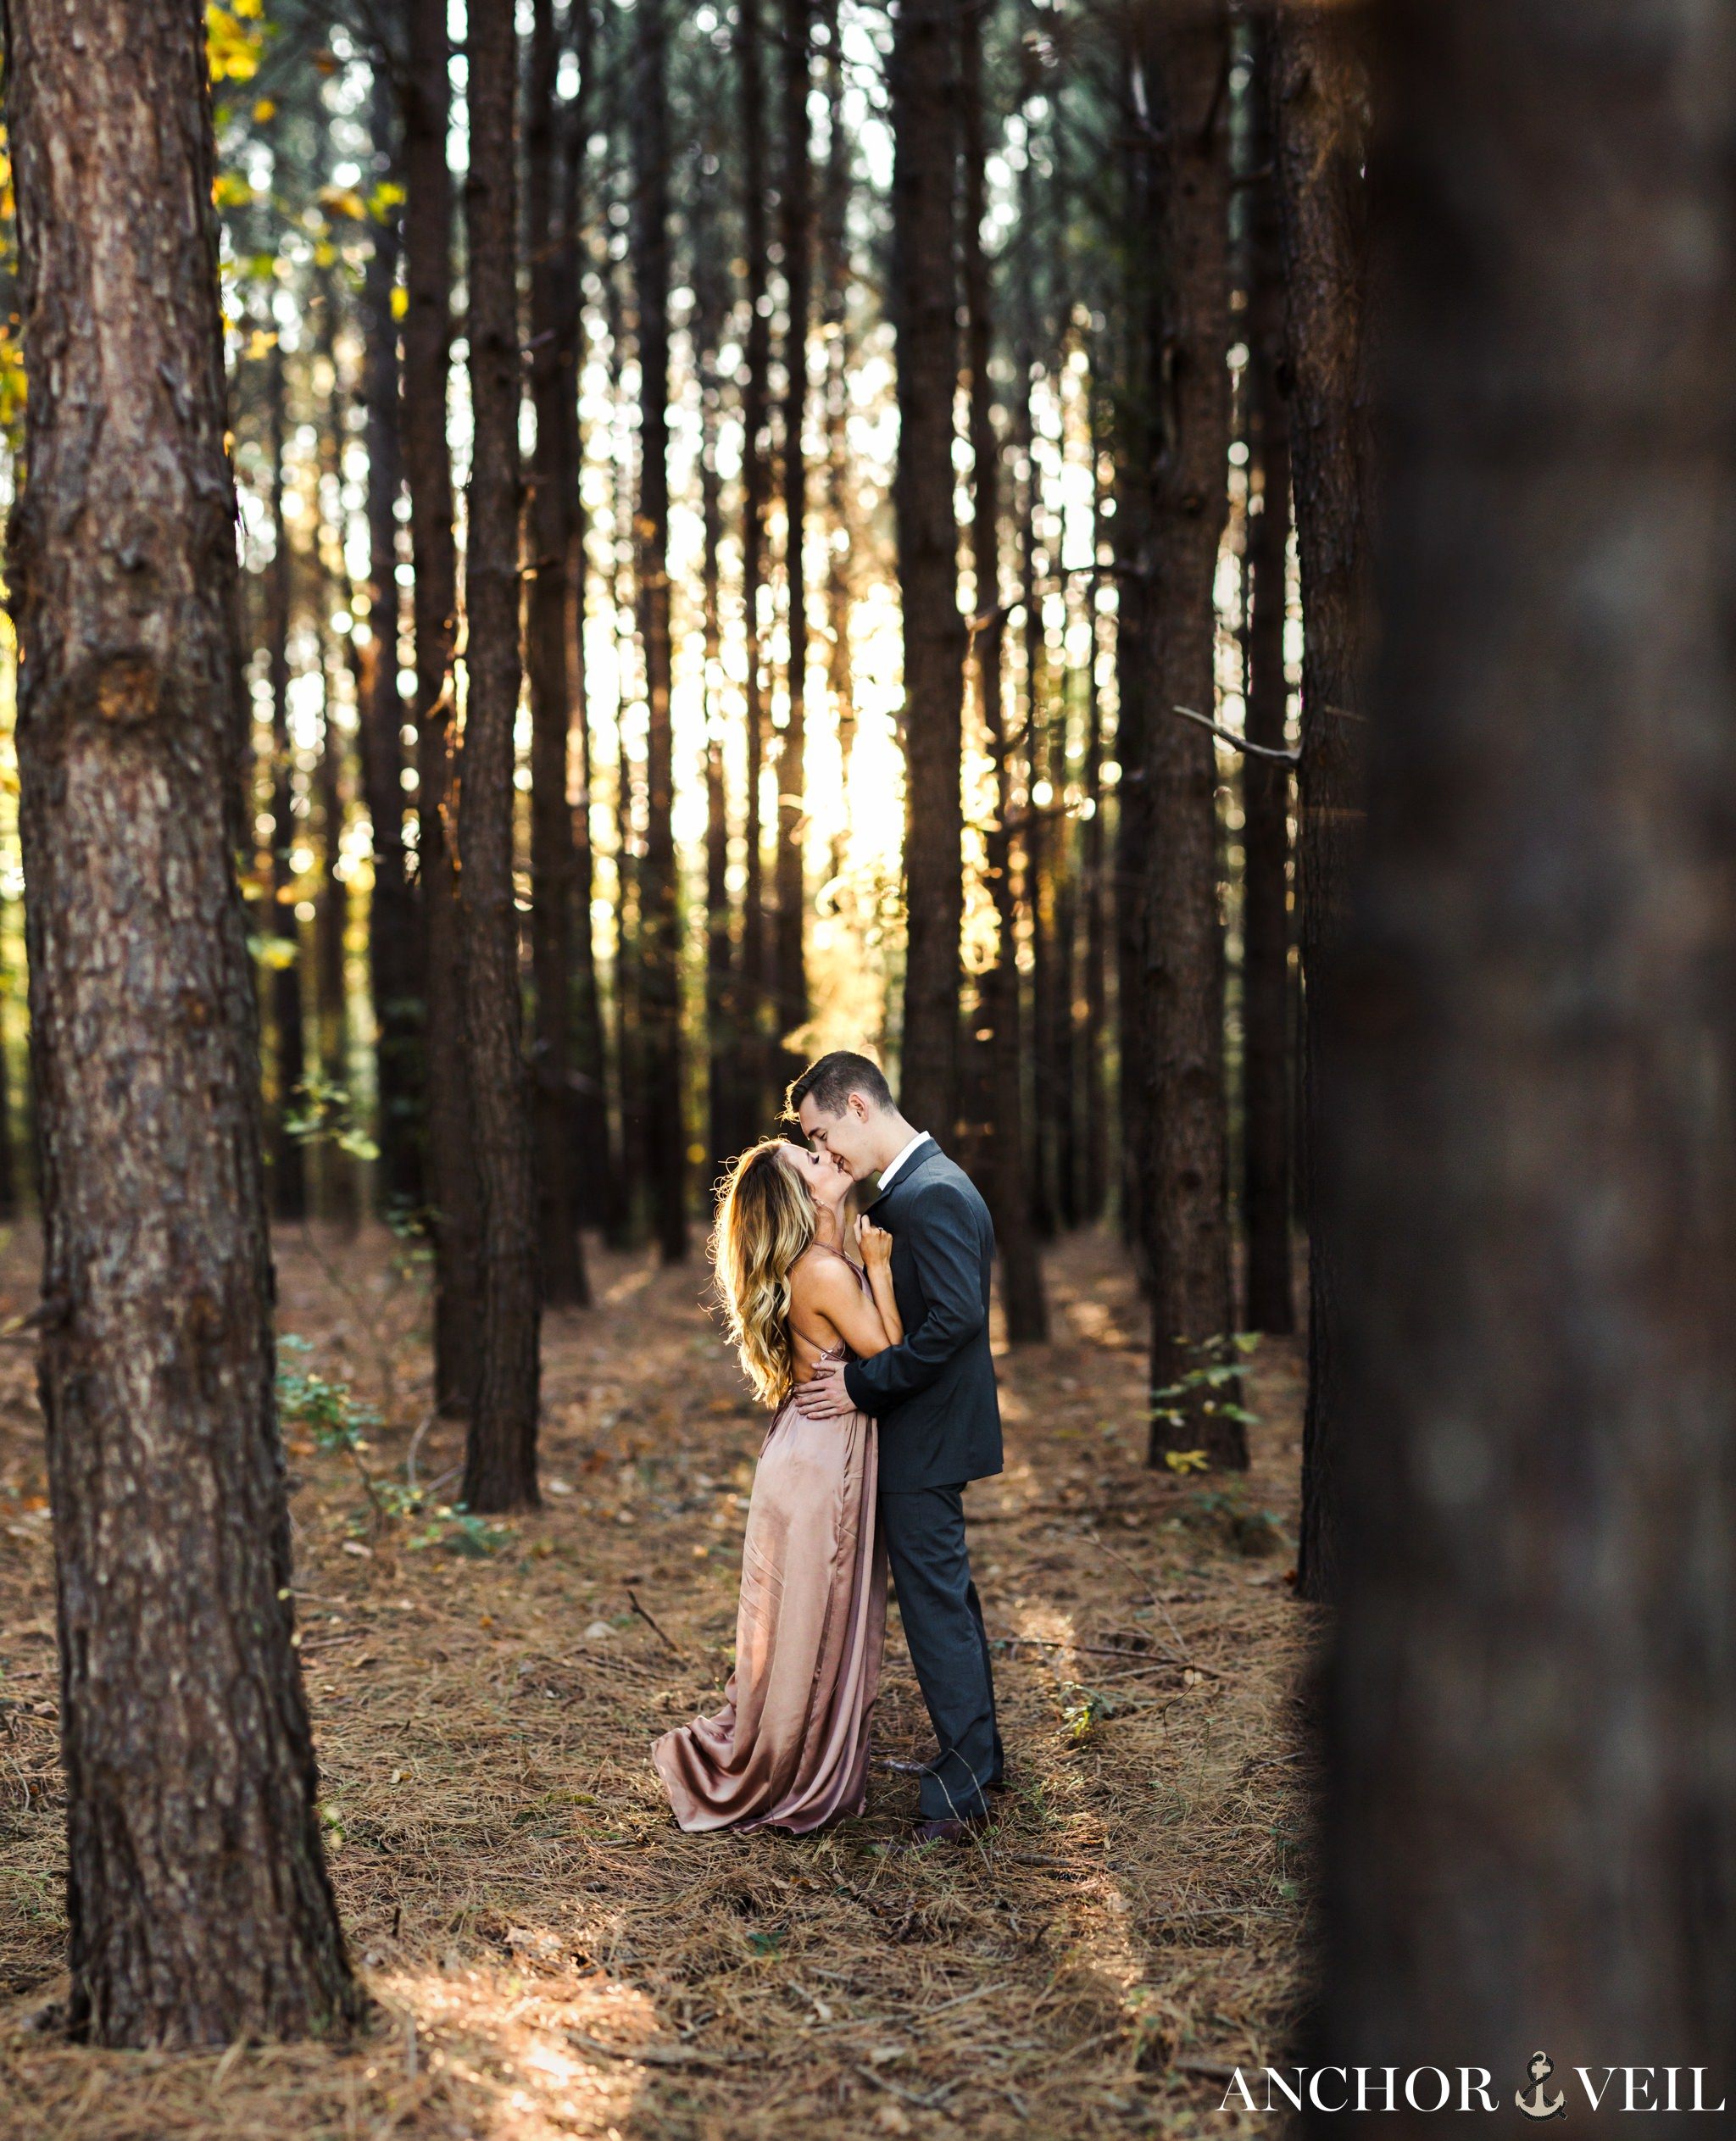 brenizer method in the tree forest during their charlotte engagement session